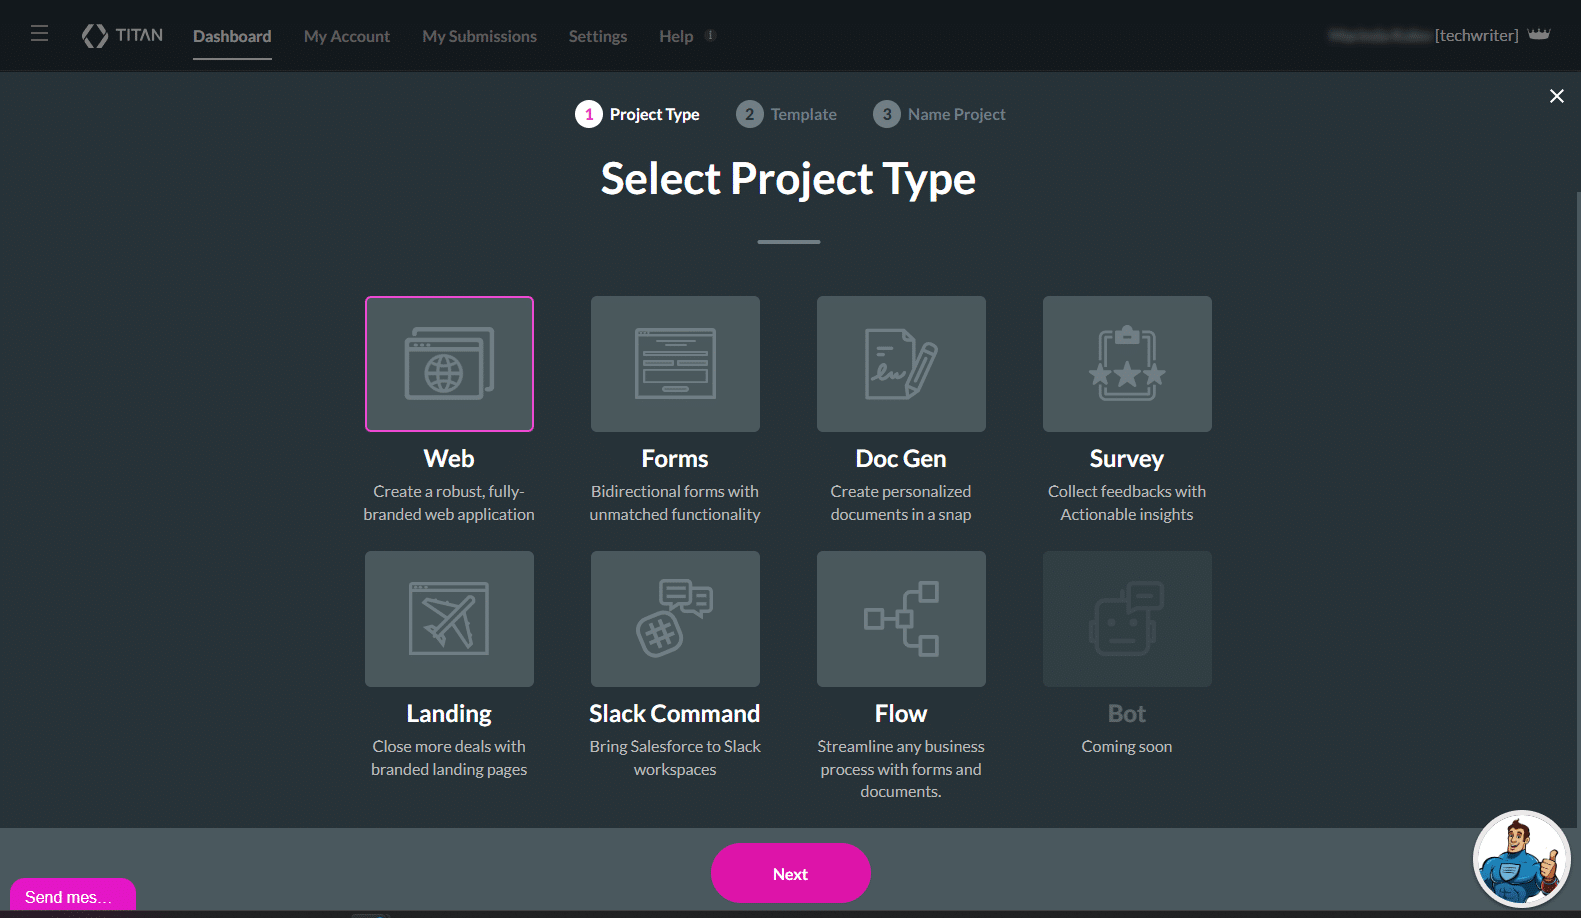 Select Project Type screen - Web option